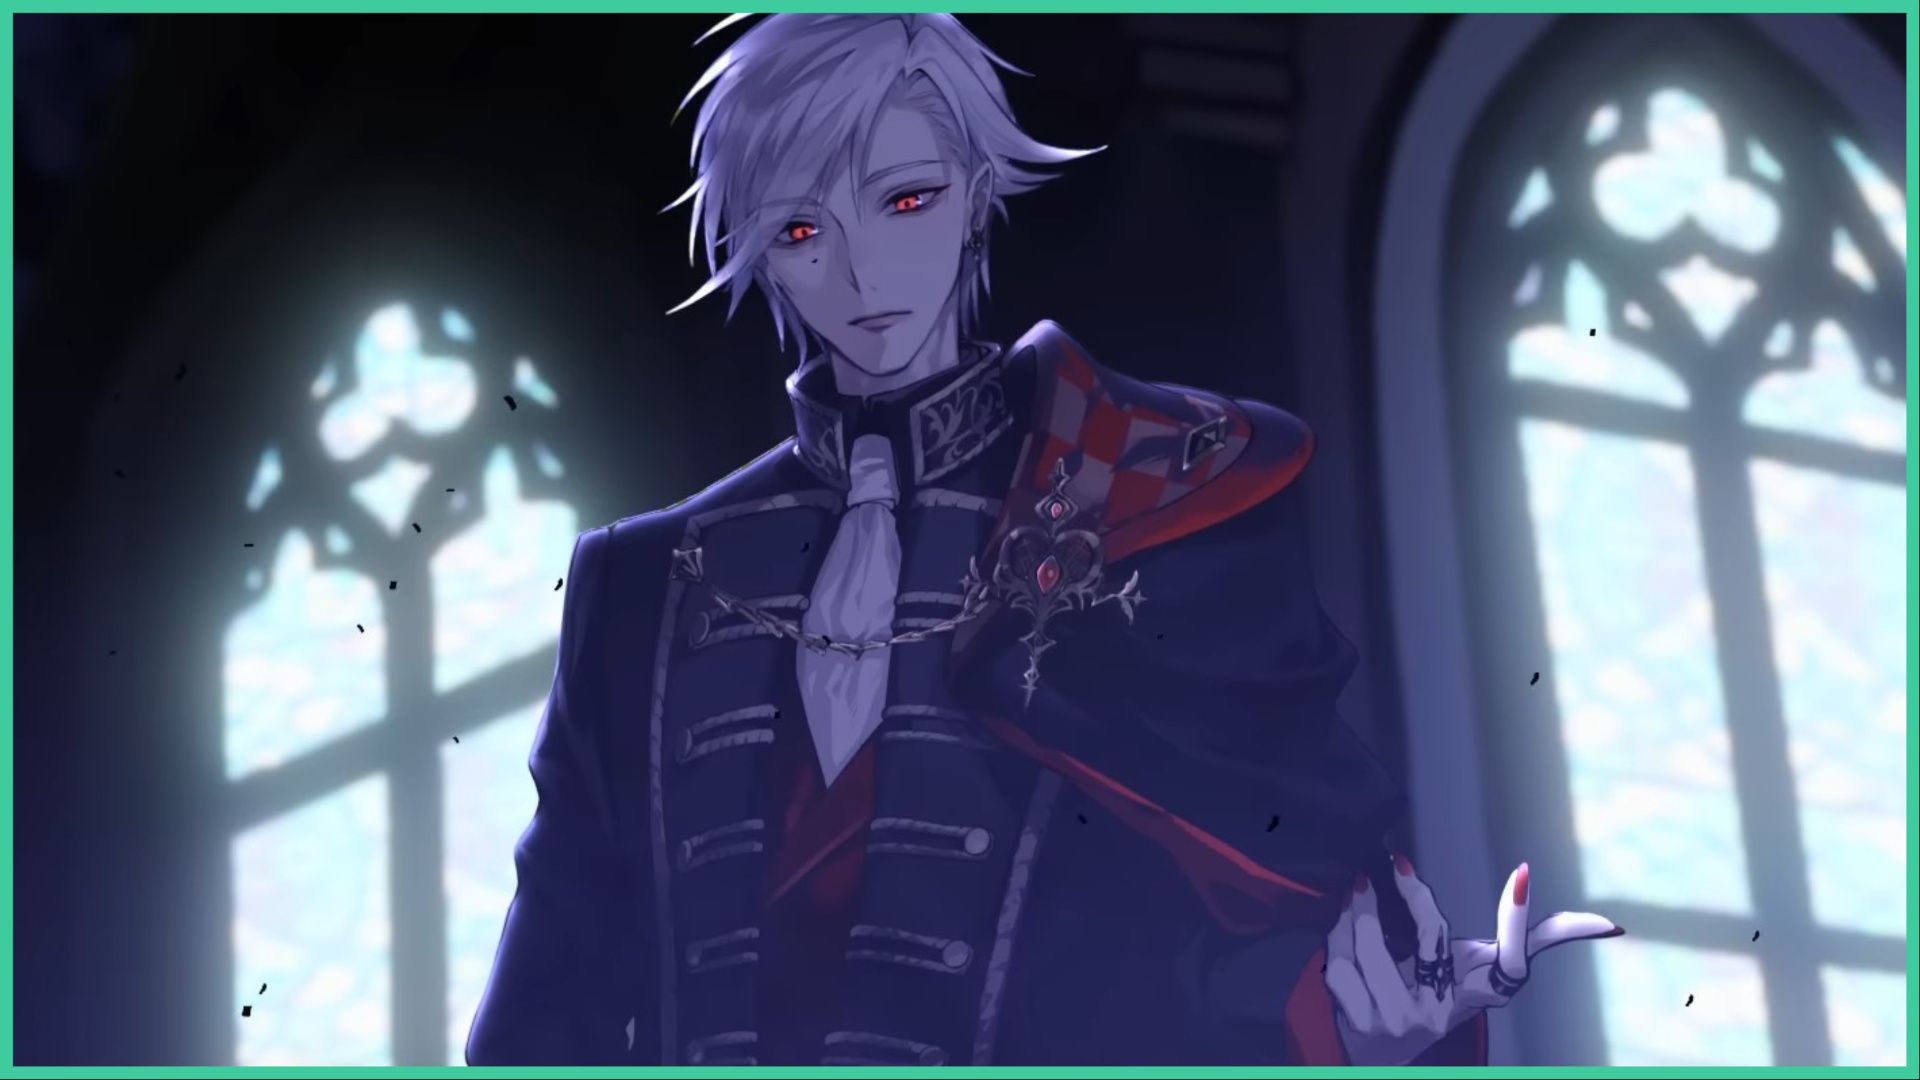 feature image for our ikemen villains william rex guide, it's a screenshot from the game's trailer of william rex standing in front of two windows outdoors as he lifts his hand up with red painted nails and rings, while wearing a cloak over his regal clothing, he has bright red eyes and messy white hair